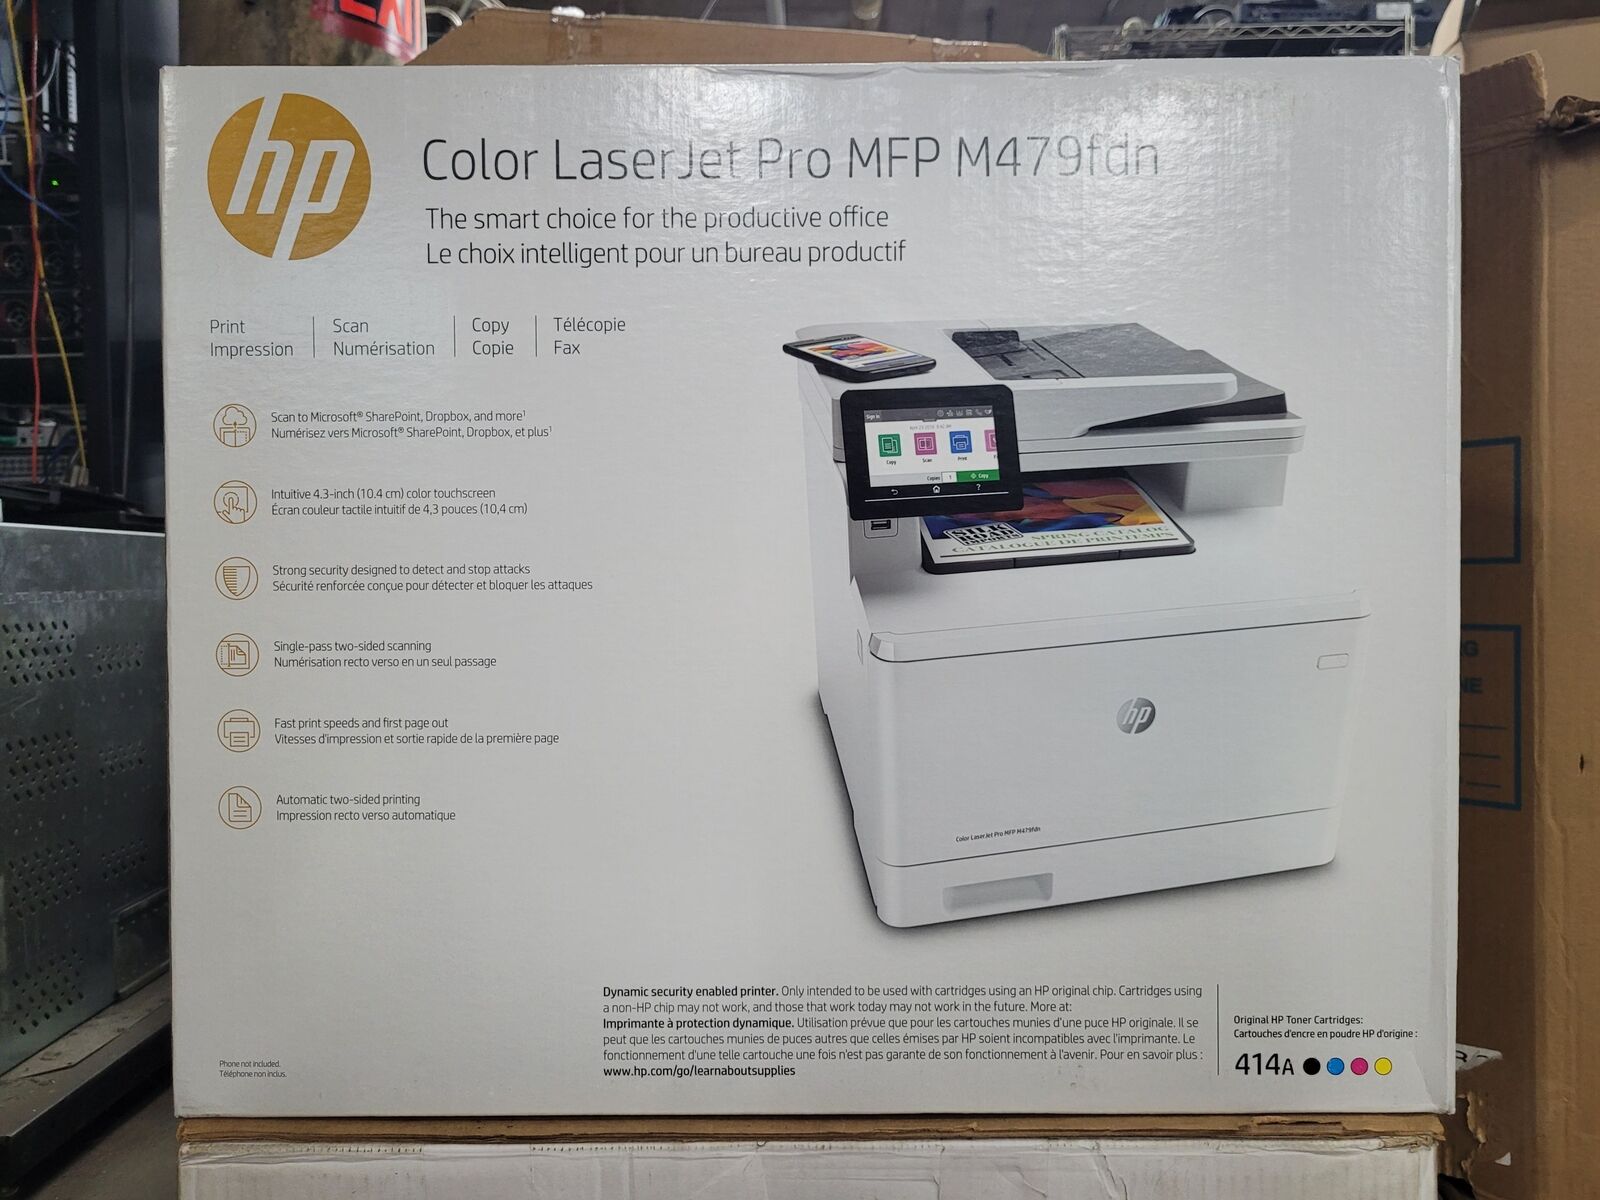 -NEW- HP LaserJet Pro MFP M479fdn Color Laser All In One Printer FACTORY SEALED